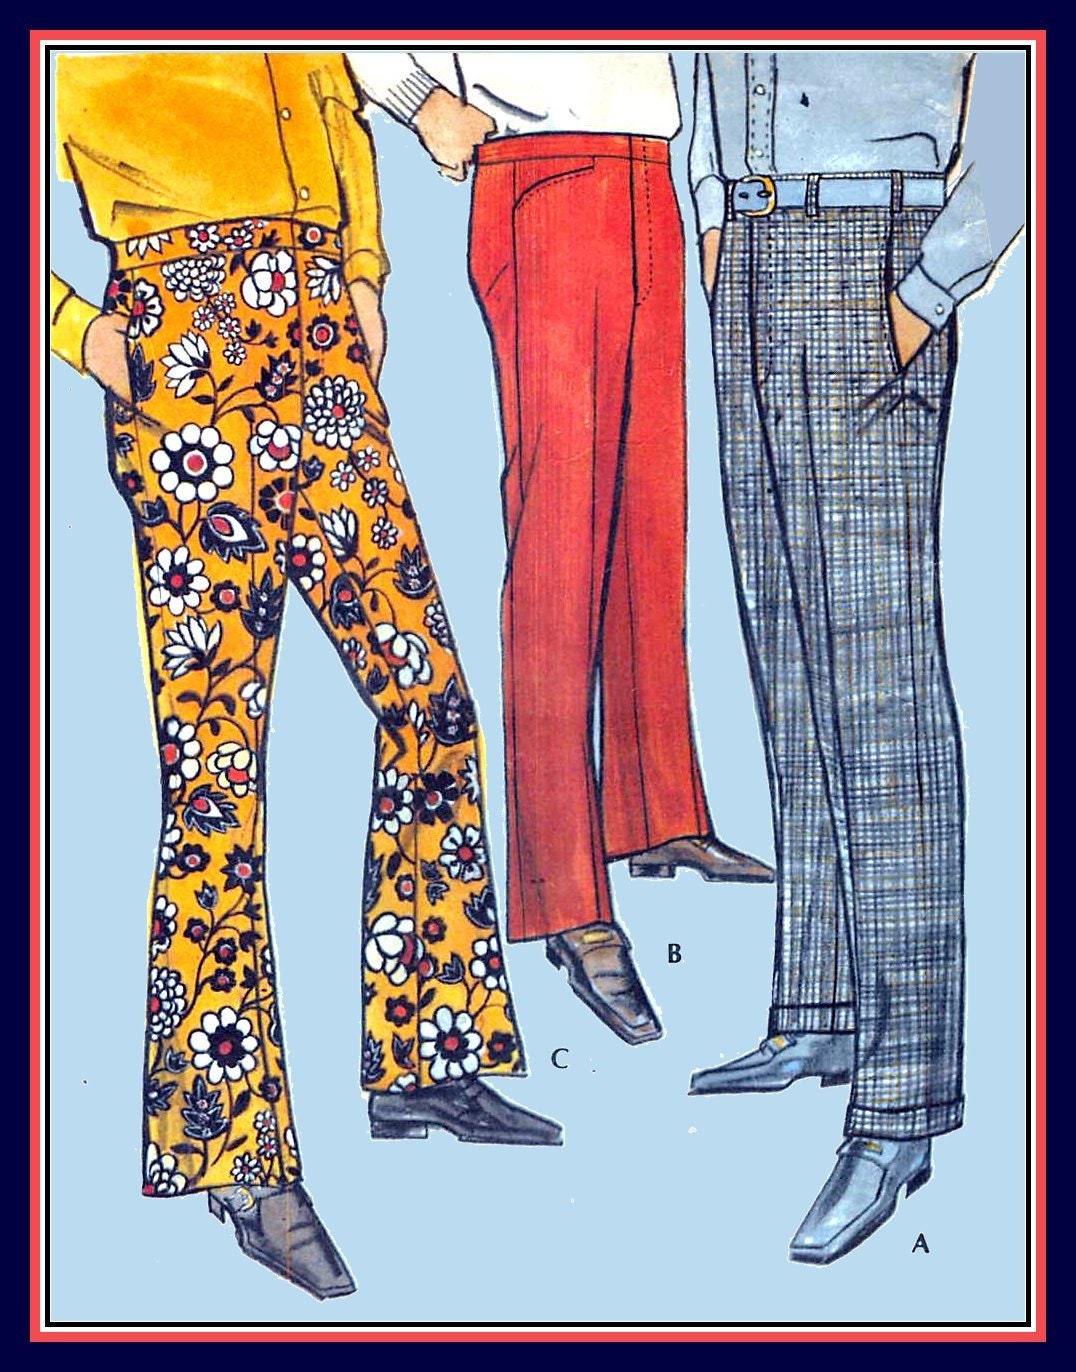 70's Sewing Pattern for Men's Straight, Cuffed or Bell Bottom Leg Pants,  Mccall's 9687 